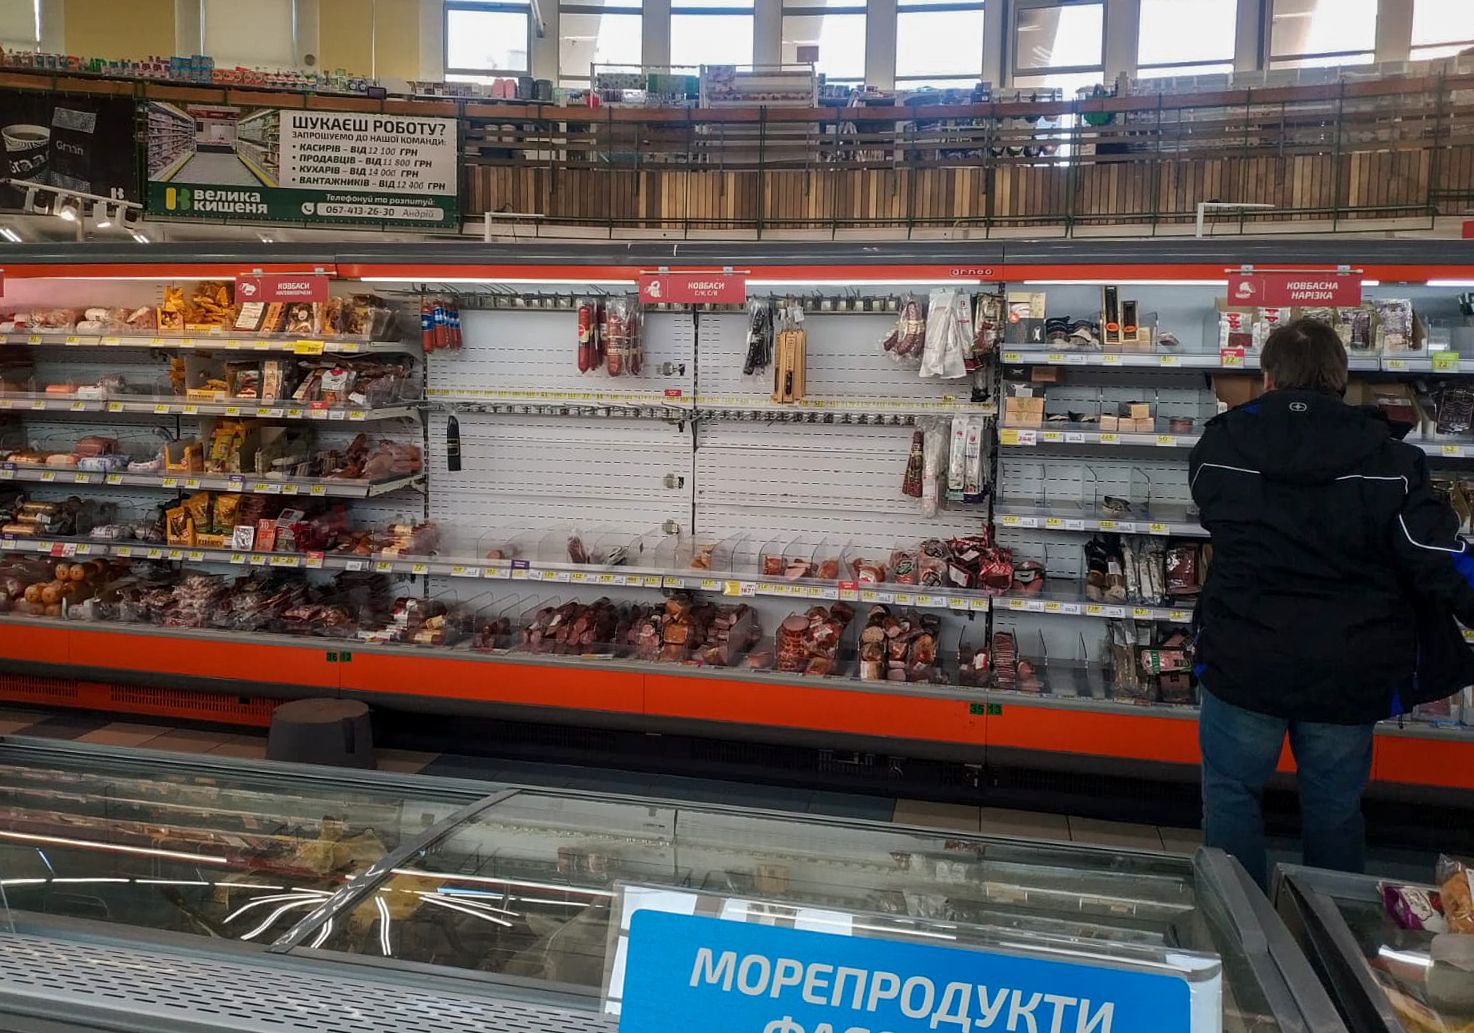 A photo shows empty shelves at a market due to the problems in food stocks, in Ukrainian capital Kyiv as Russiaâs military attack in Ukraine continues on February 26.